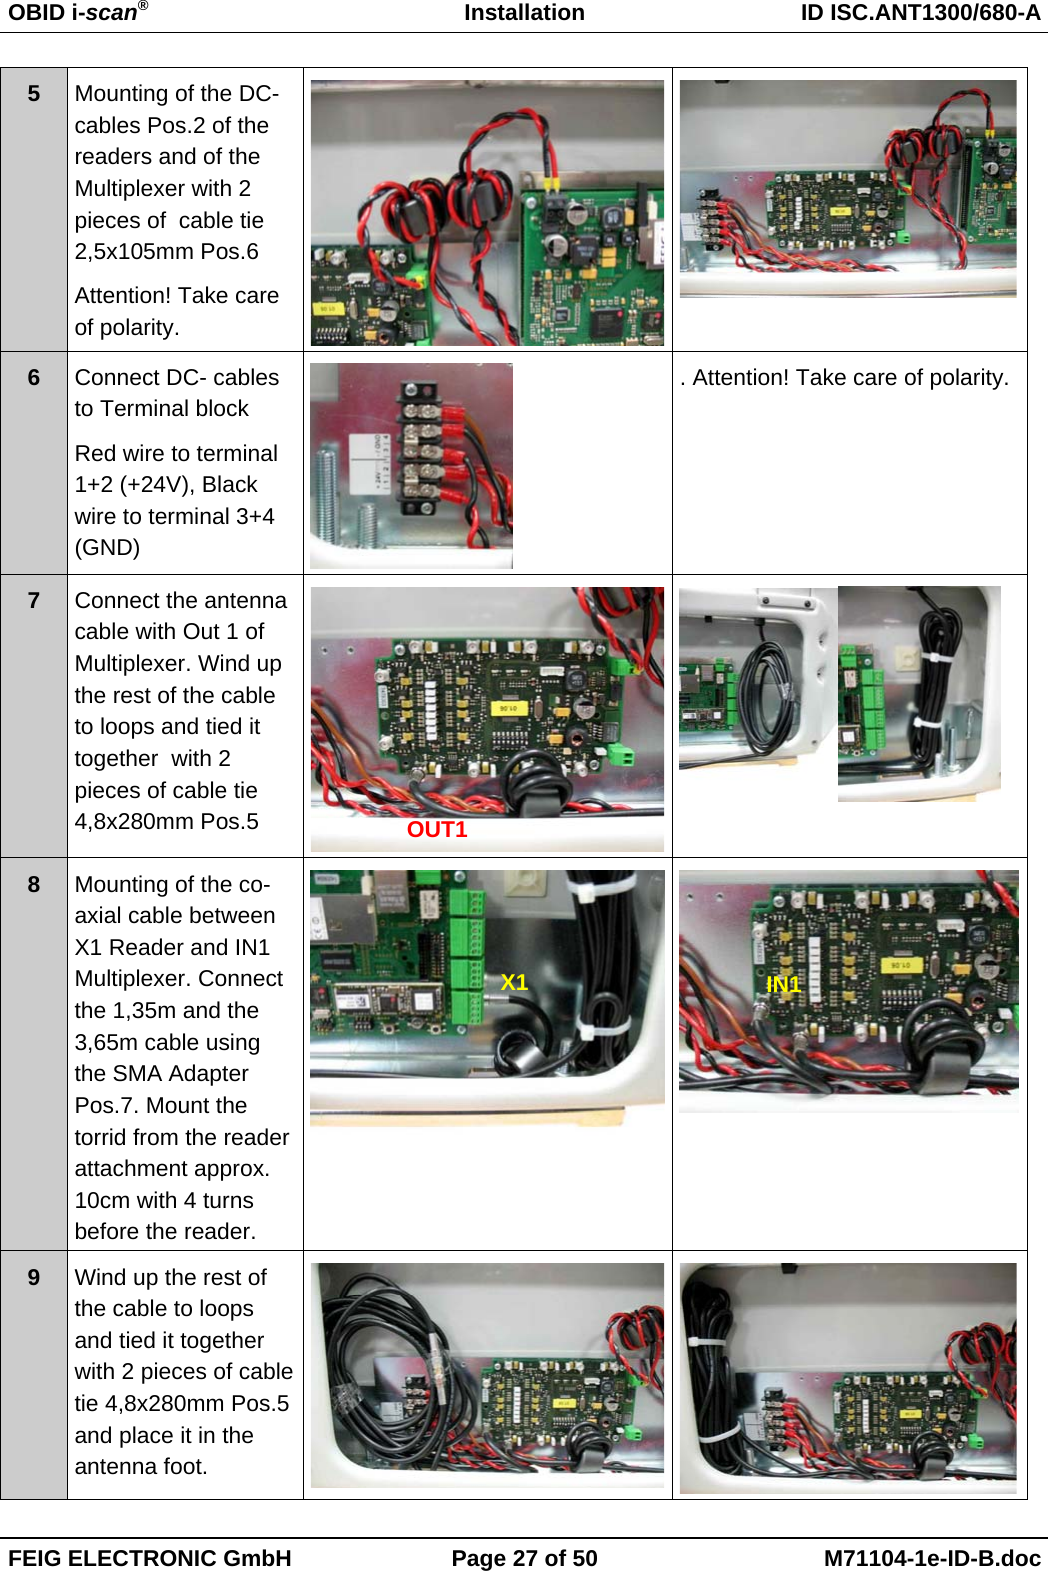 OBID i-scan®Installation ID ISC.ANT1300/680-AFEIG ELECTRONIC GmbH Page 27 of 50 M71104-1e-ID-B.doc5Mounting of the DC-cables Pos.2 of thereaders and of theMultiplexer with 2pieces of  cable tie2,5x105mm Pos.6Attention! Take careof polarity.6Connect DC- cablesto Terminal blockRed wire to terminal1+2 (+24V), Blackwire to terminal 3+4(GND). Attention! Take care of polarity.7Connect the antennacable with Out 1 ofMultiplexer. Wind upthe rest of the cableto loops and tied ittogether  with 2pieces of cable tie4,8x280mm Pos.58Mounting of the co-axial cable betweenX1 Reader and IN1Multiplexer. Connectthe 1,35m and the3,65m cable usingthe SMA AdapterPos.7. Mount thetorrid from the readerattachment approx.10cm with 4 turnsbefore the reader.9Wind up the rest ofthe cable to loopsand tied it togetherwith 2 pieces of cabletie 4,8x280mm Pos.5and place it in theantenna foot.X1OUT1IN1